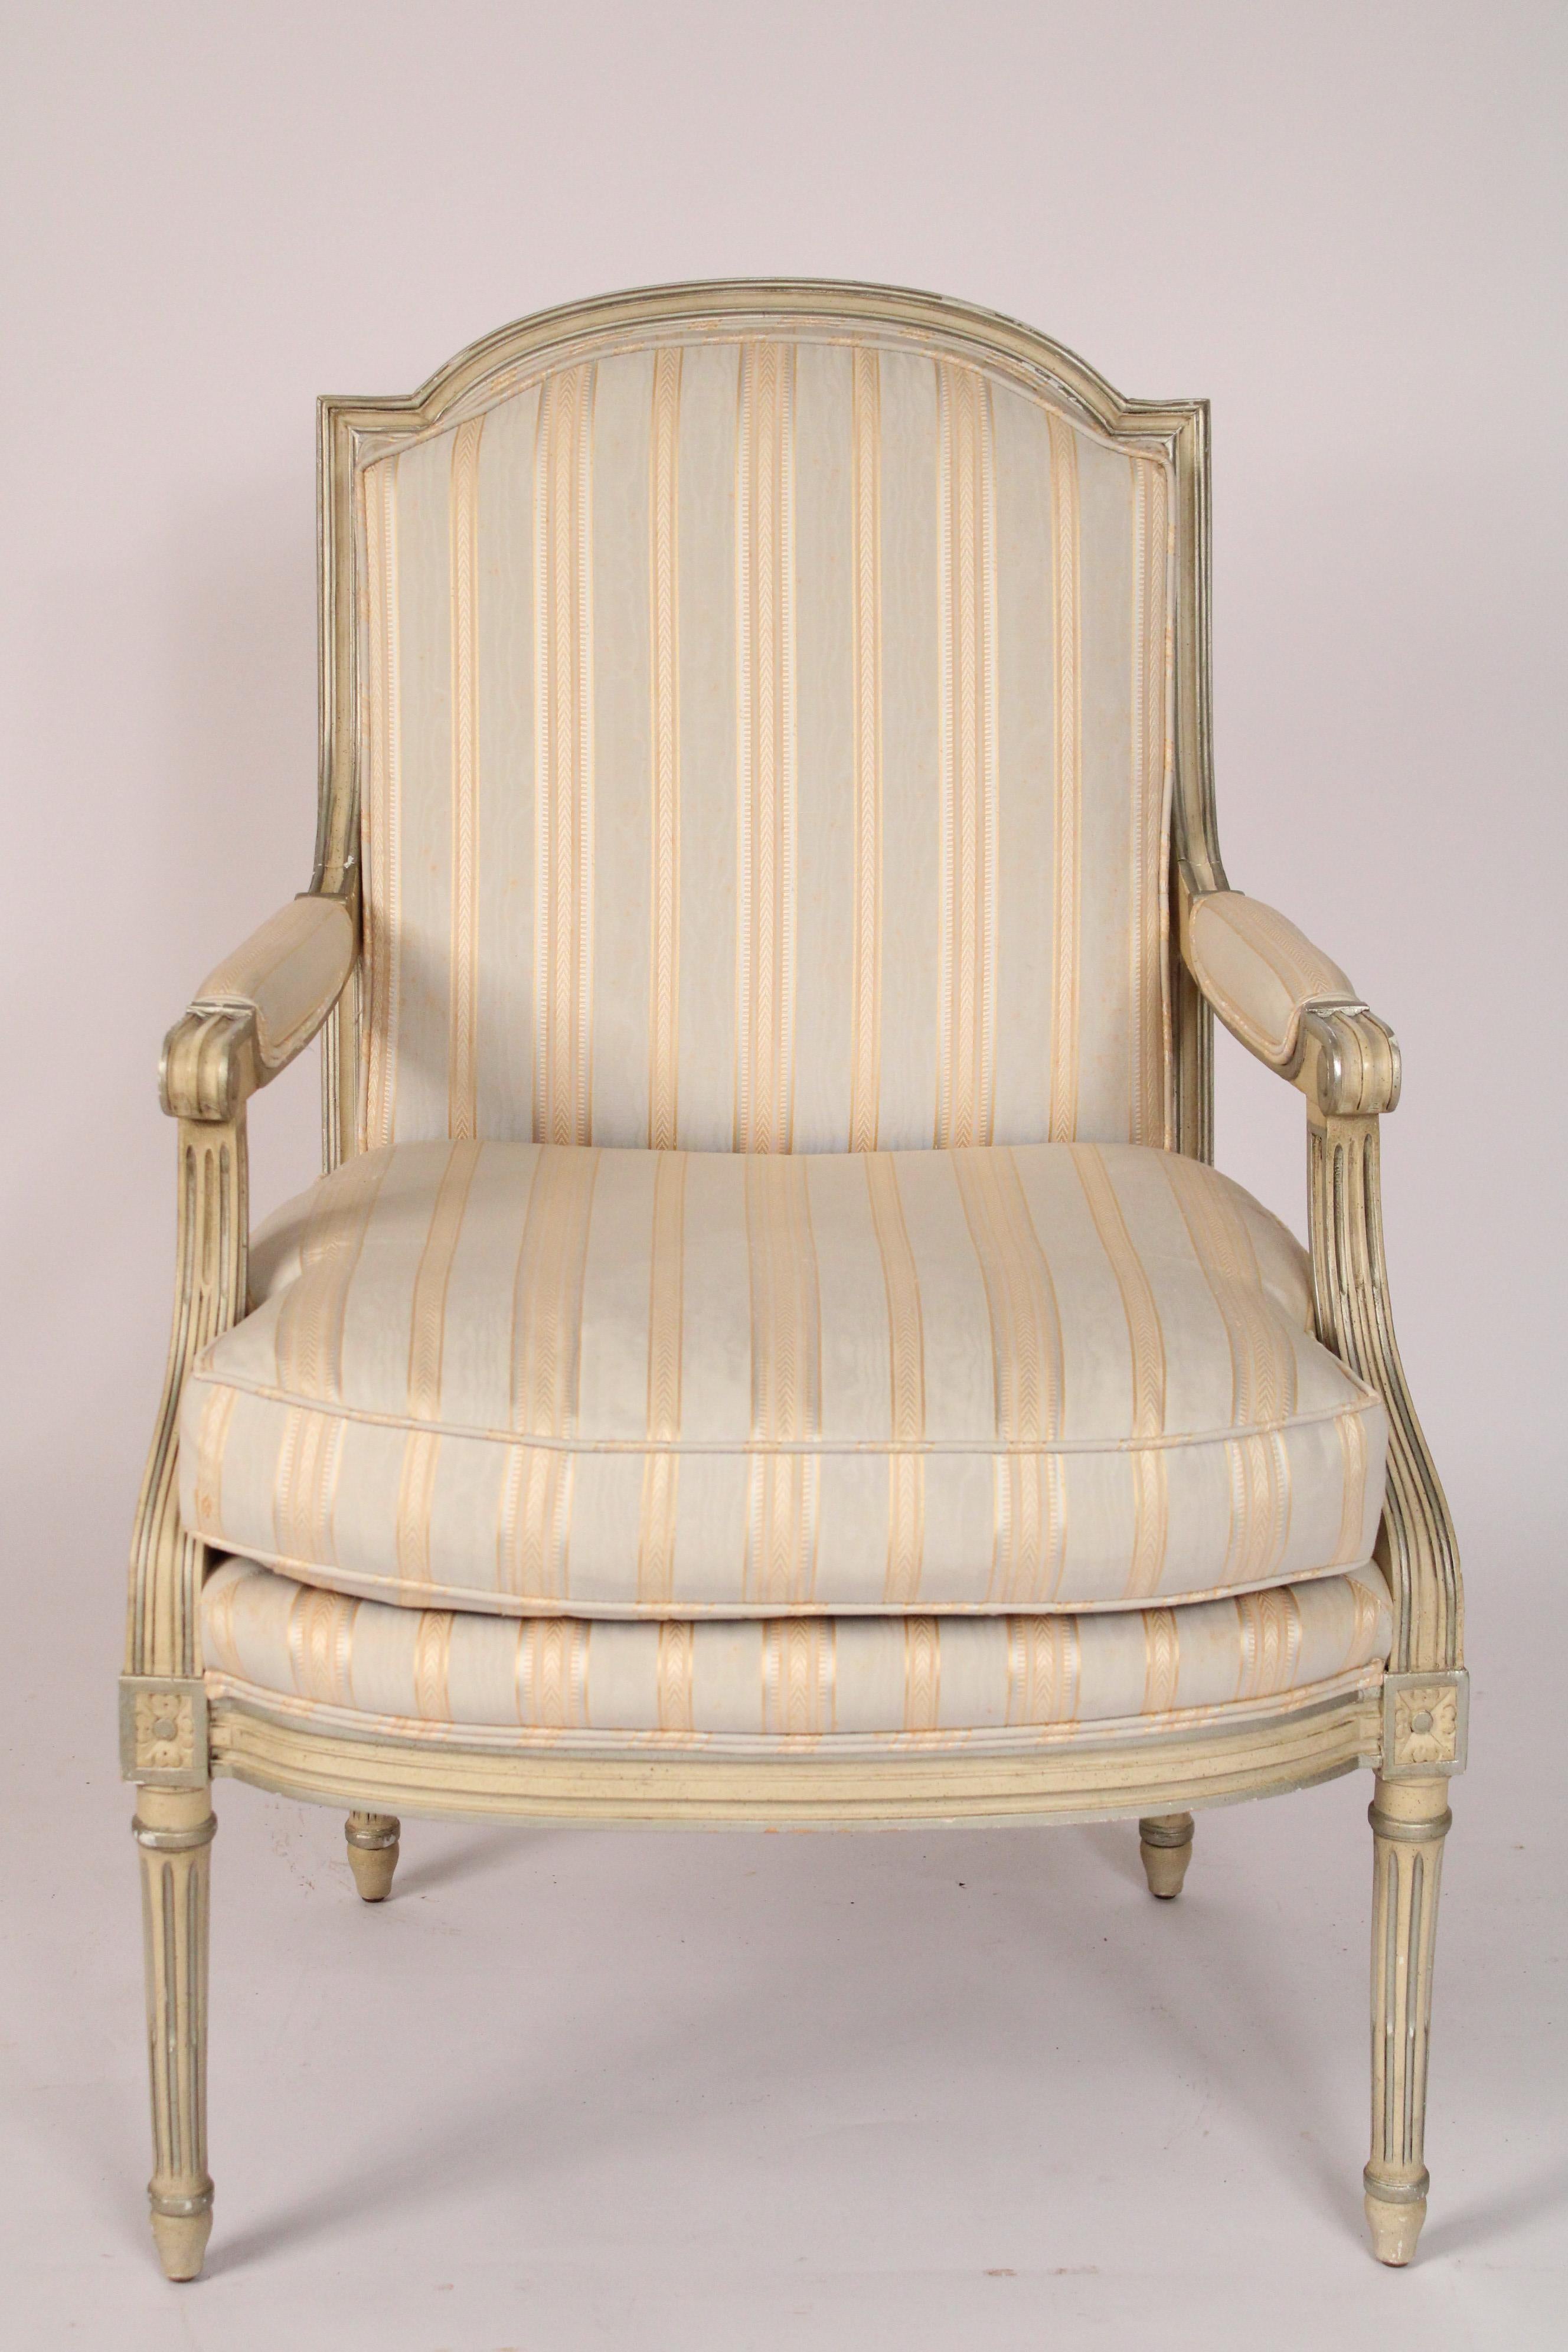 Louis XVI style painted armchair, made by Baker Furniture Company, circa 2000. The paint is off white and silver. The cushion is partial down filled, see photo of upholstery contents.